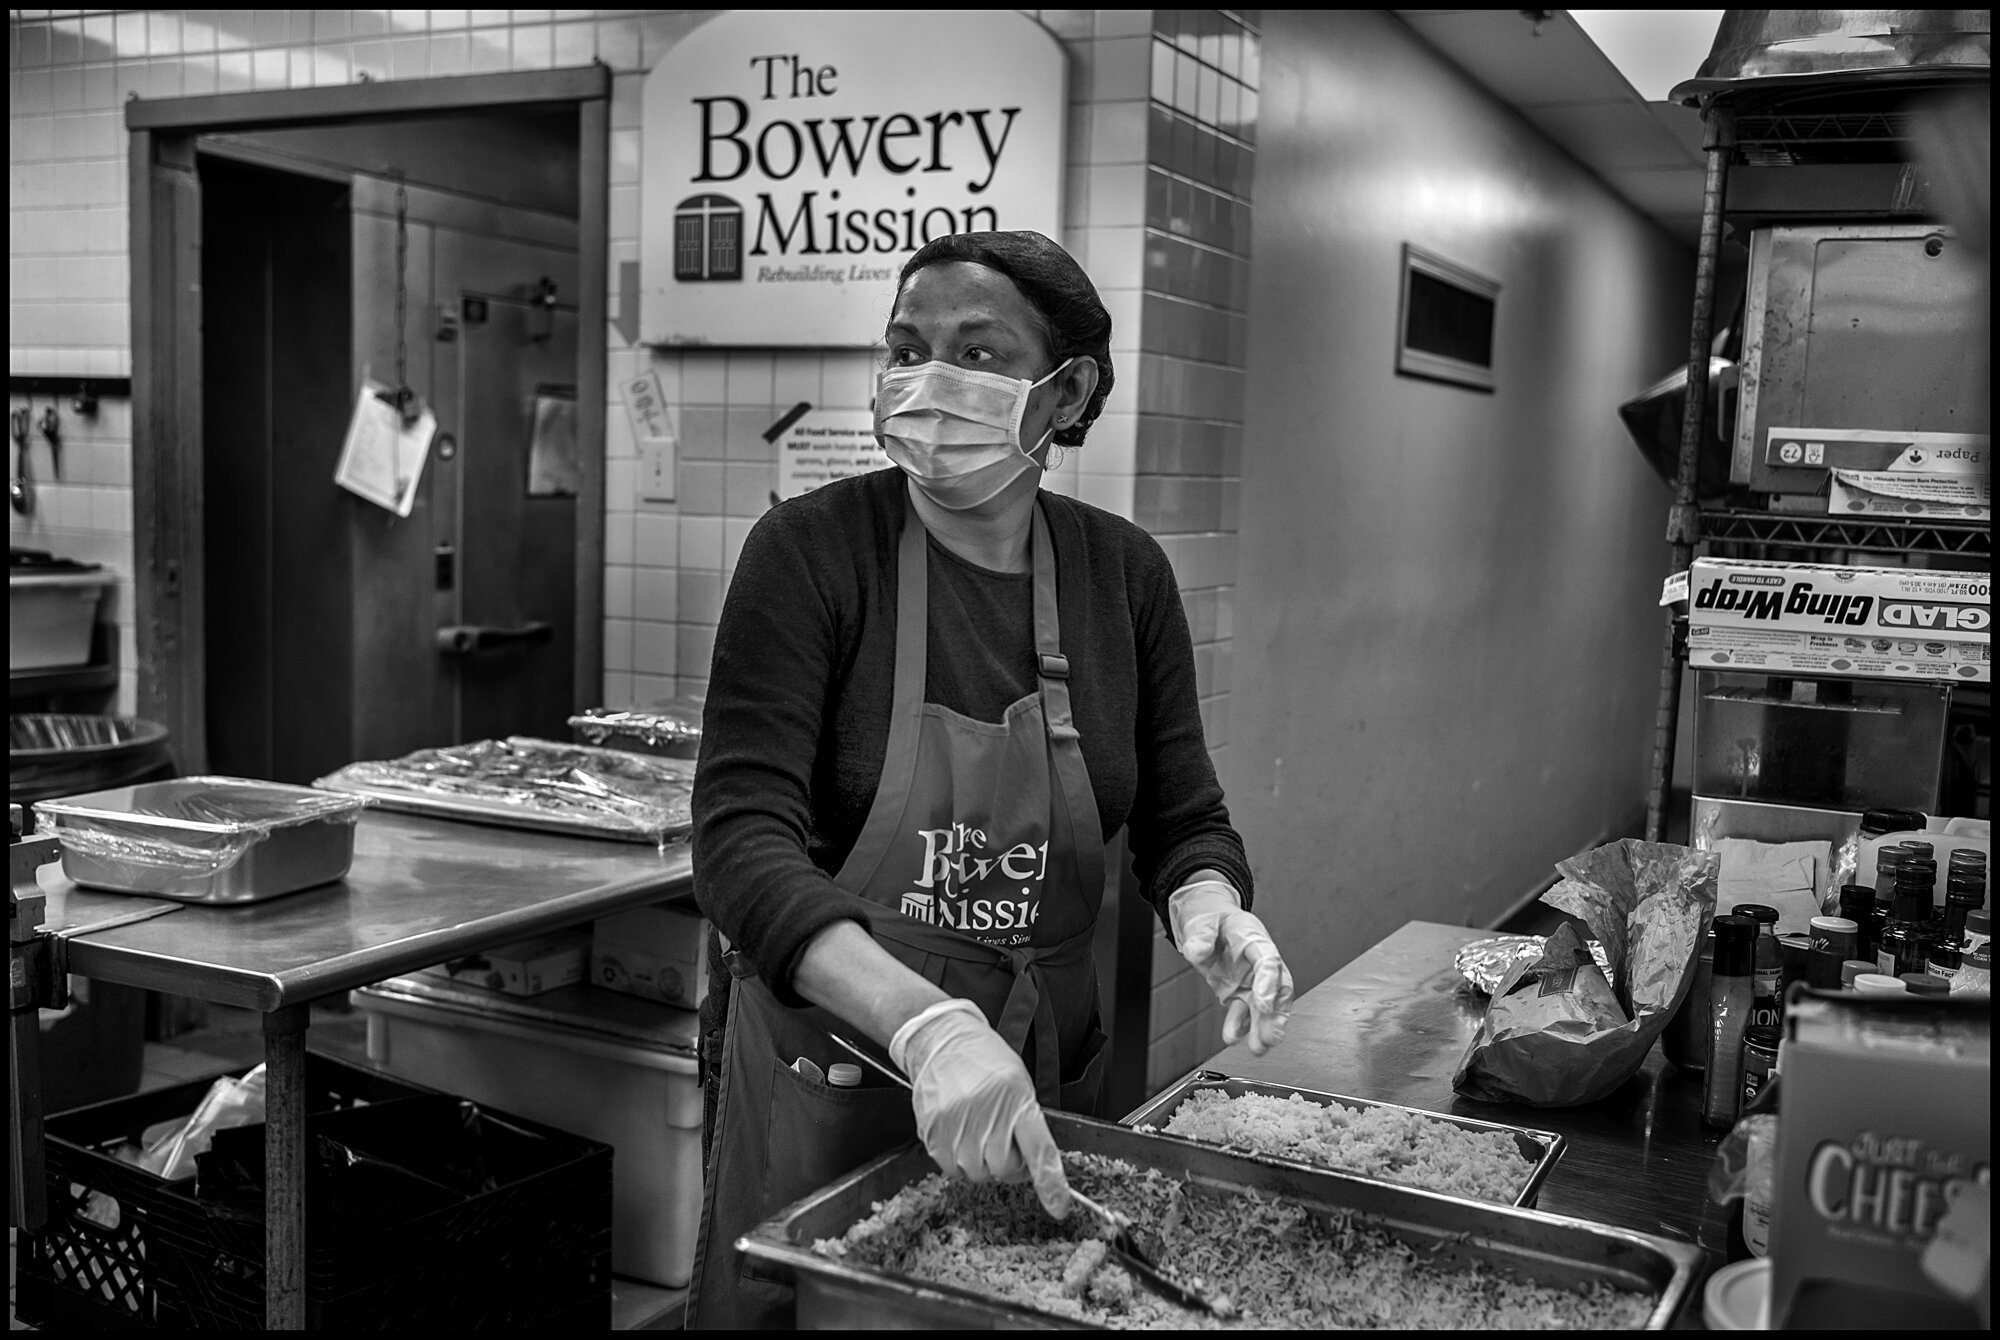  Wanda, a cook at the Bowery Mission.  April 10, 2020. © Peter Turnley  ID# 18-011 